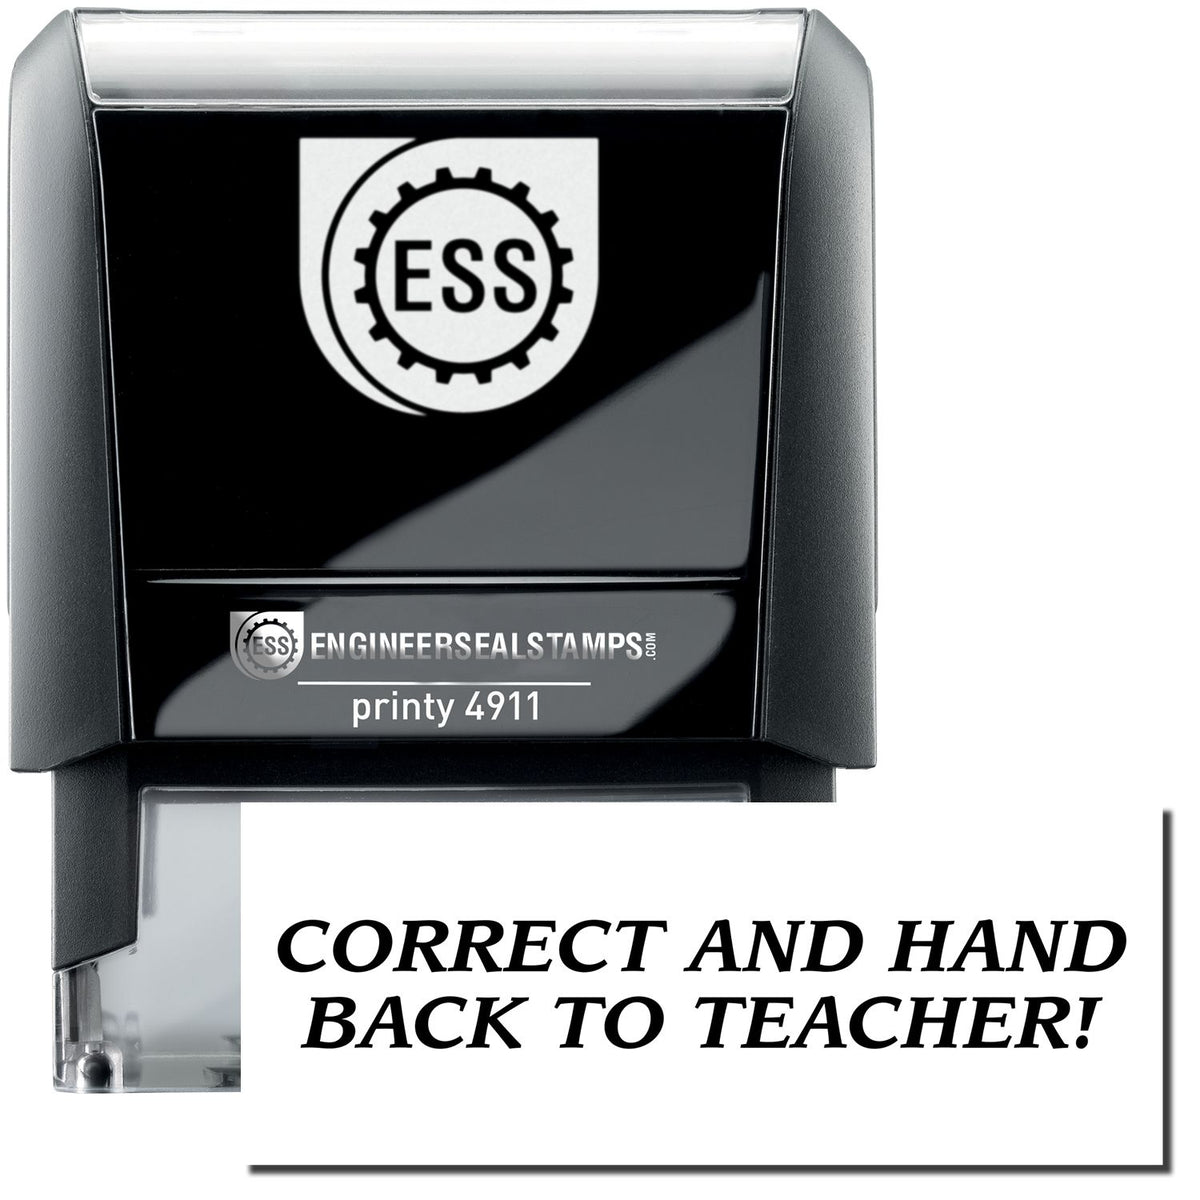 A self-inking stamp with a stamped image showing how the text &quot;CORRECT AND HAND BACK TO TEACHER!&quot; is displayed after stamping.